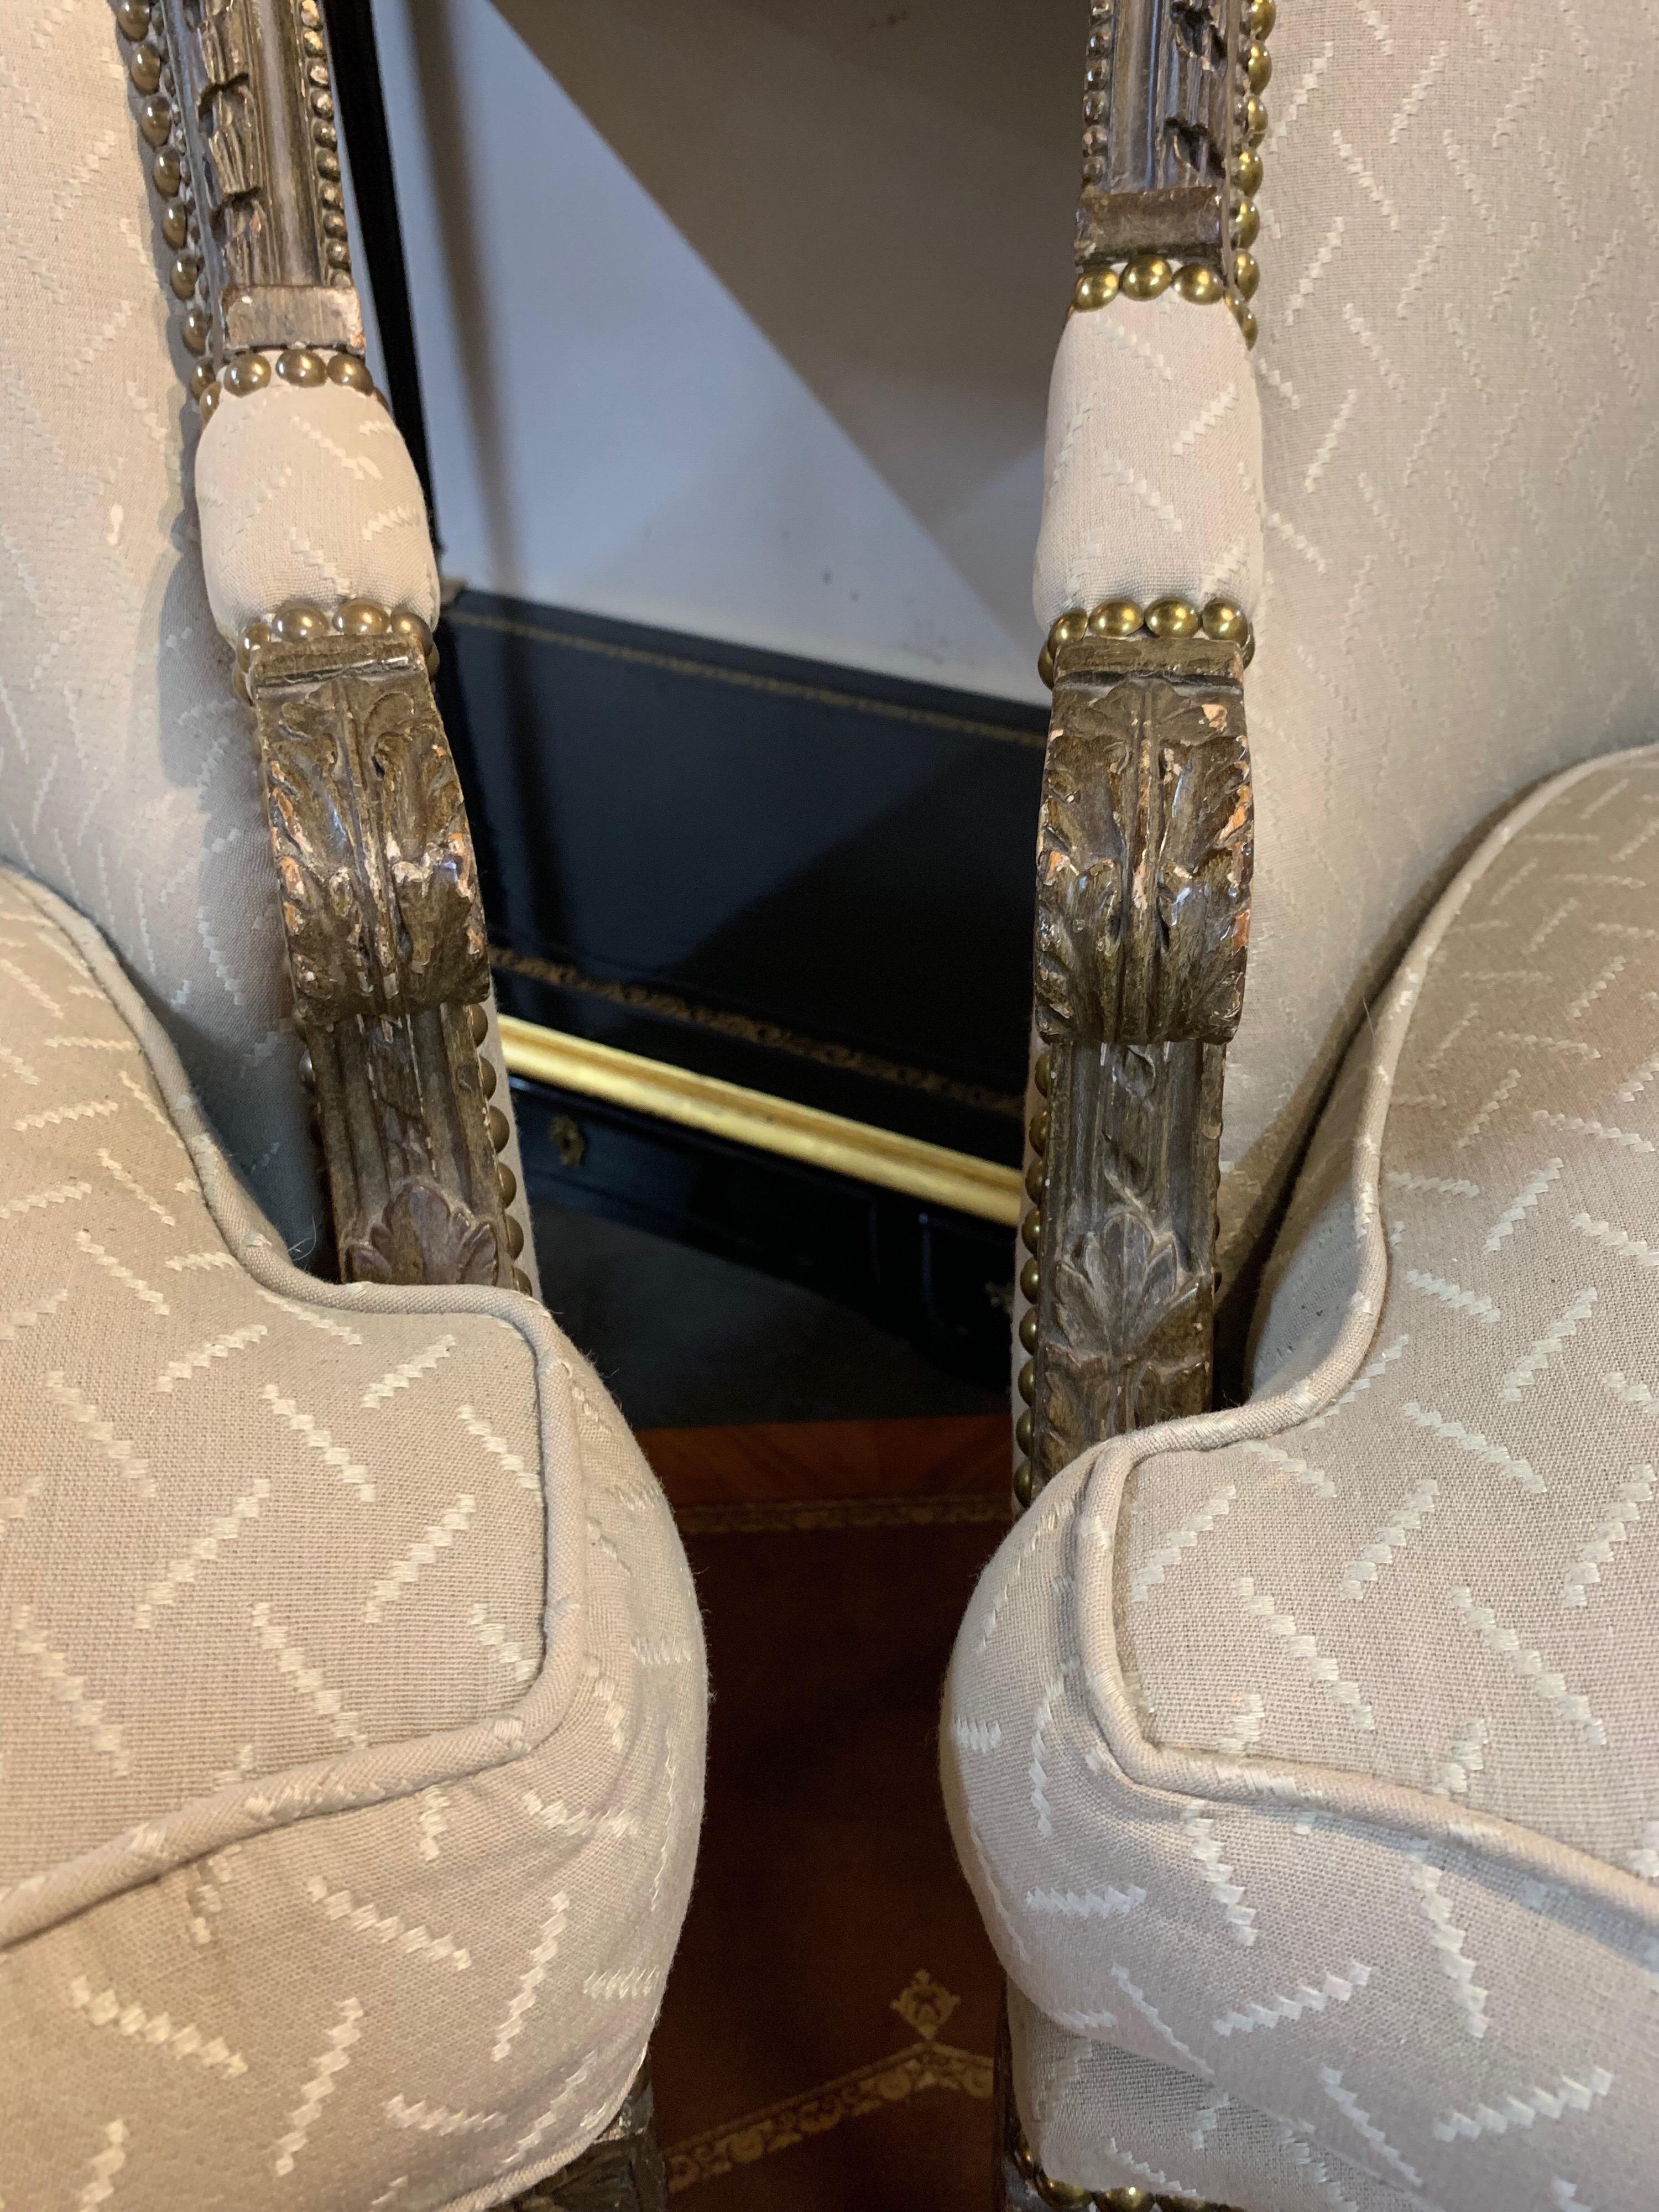 Lovely pair of petite 19th century French XVI carved and painted curved back chairs.
Very nice carving on the chairs and the upholstery is done in a beige and crème fabric. Please note: There is a small spot in the fabric on one of the chairs.